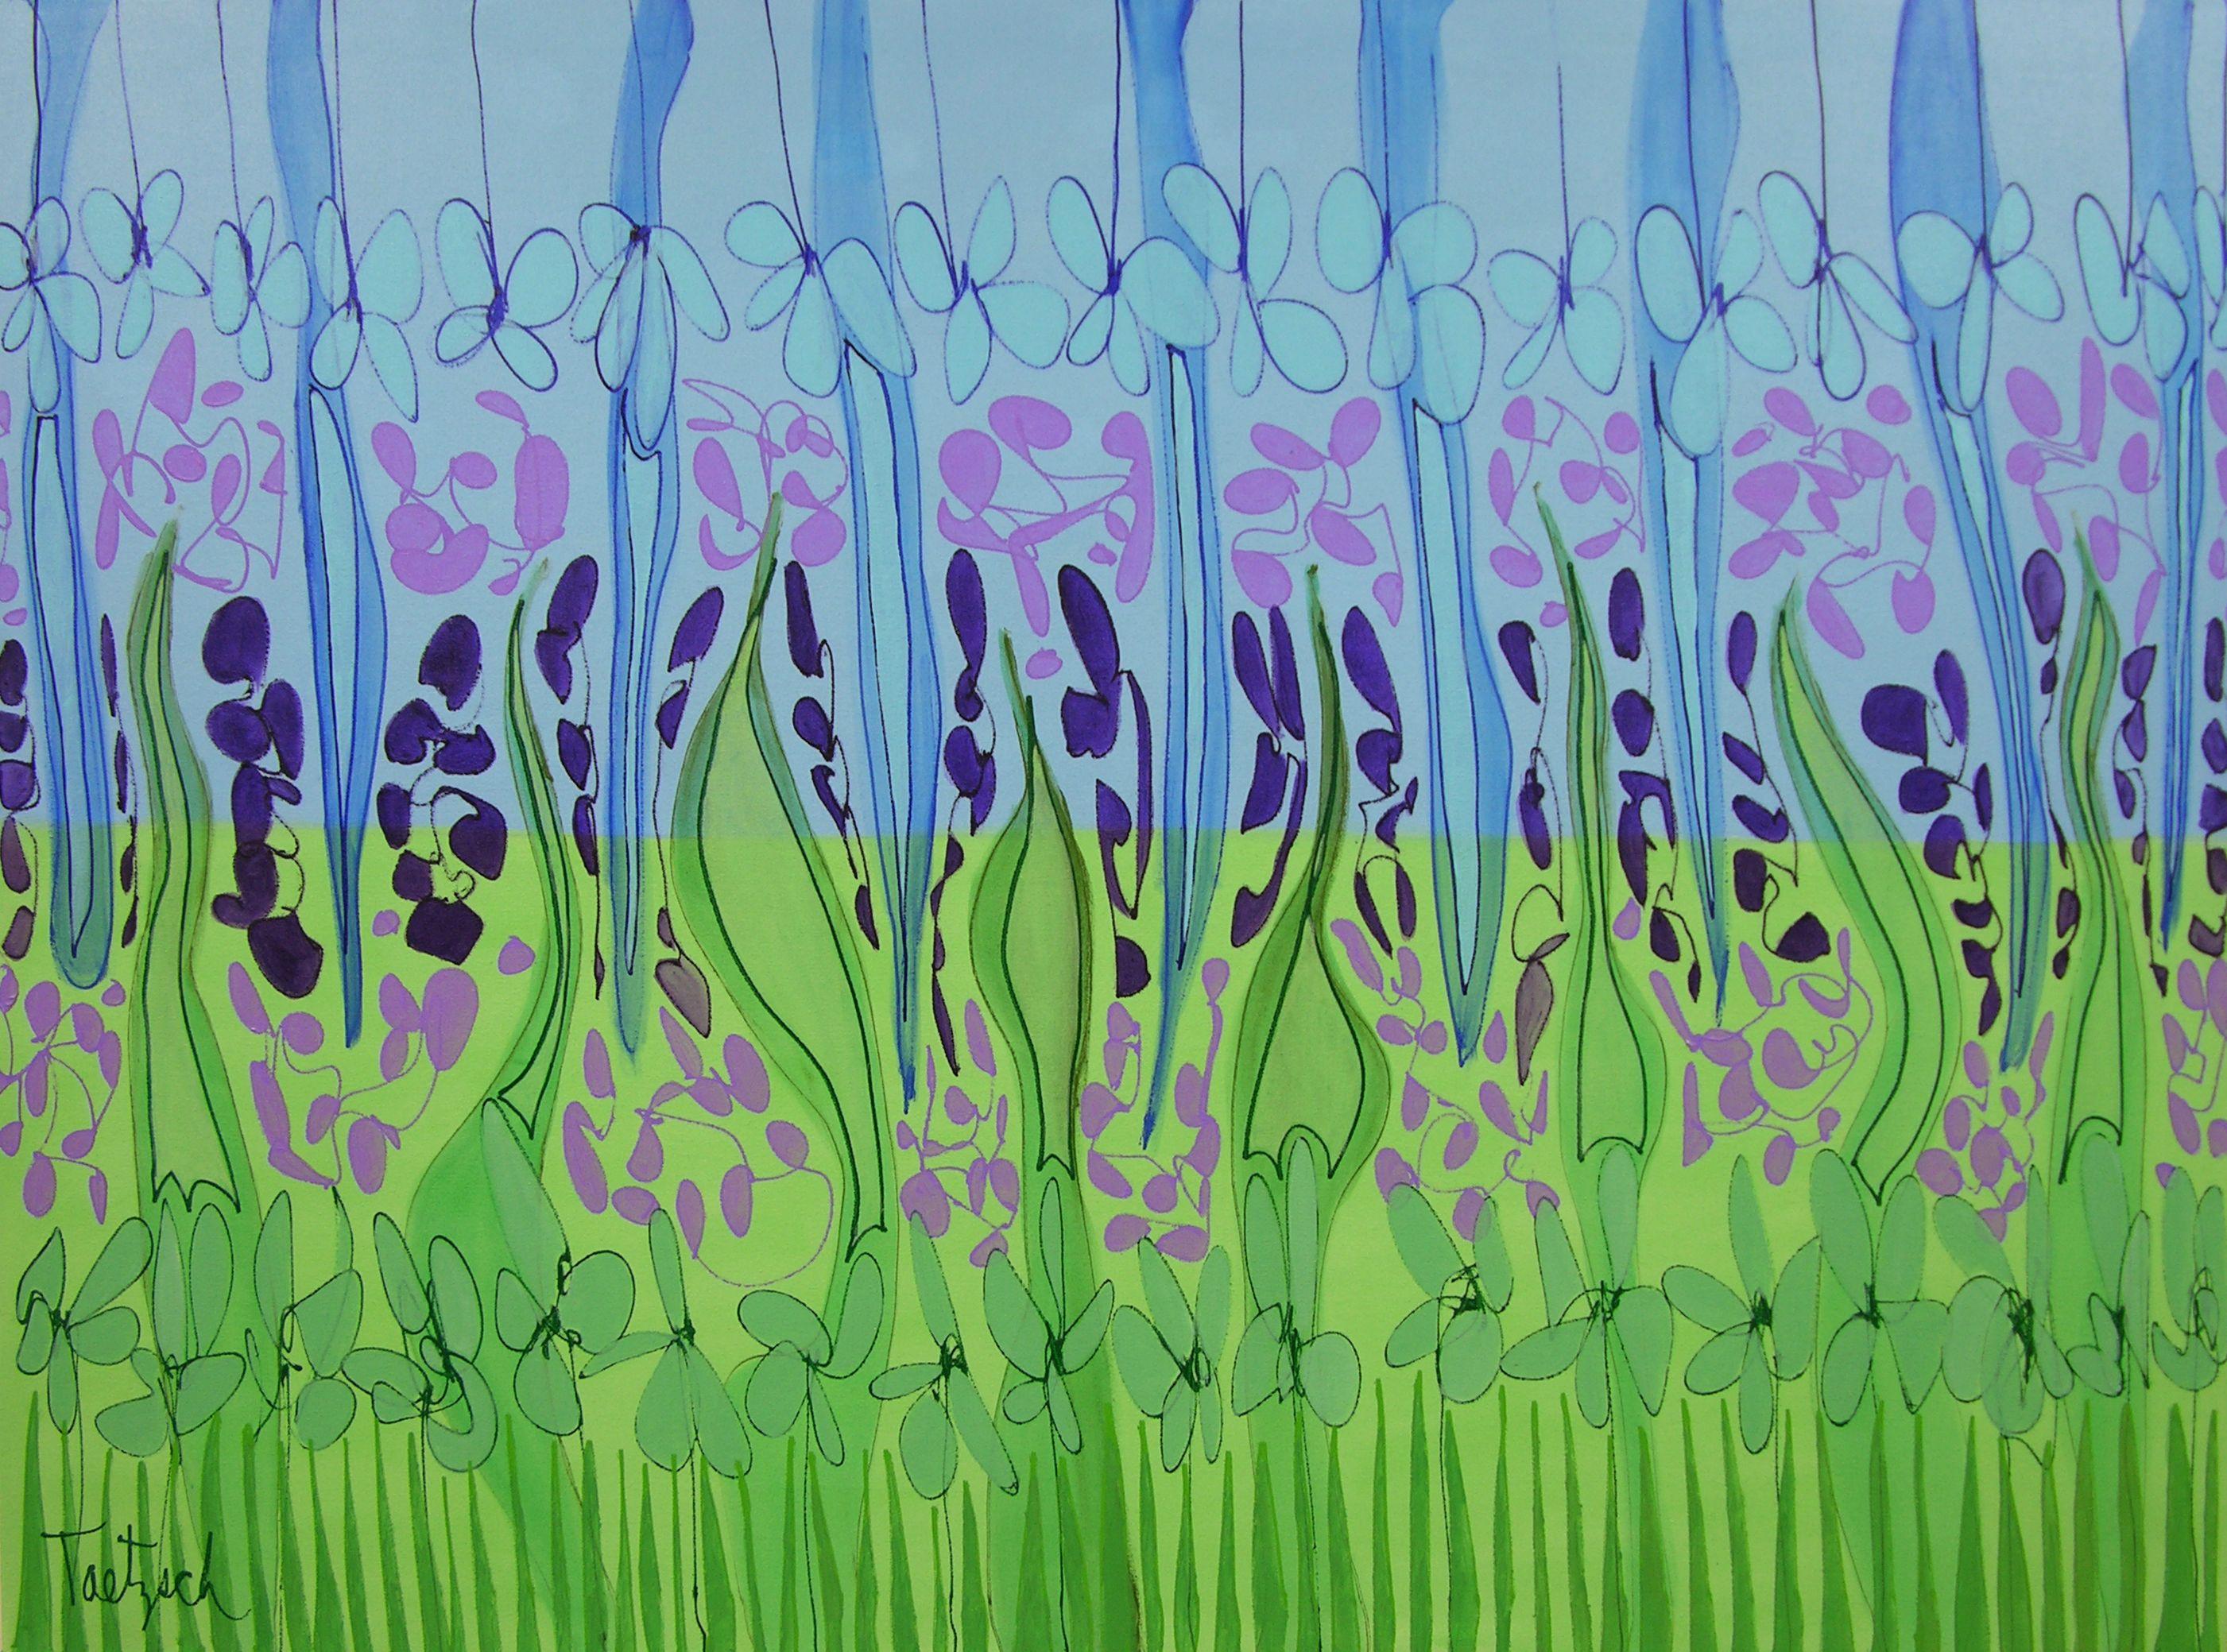 Matrixâ€™s whimsical flower-petal and leaf shapes are abstracted into simple repeating patterns that give it a decorative impact while playfully exploring color, shape and space.    56" x 42" x 1.5" original painting on stretched canvas, with the